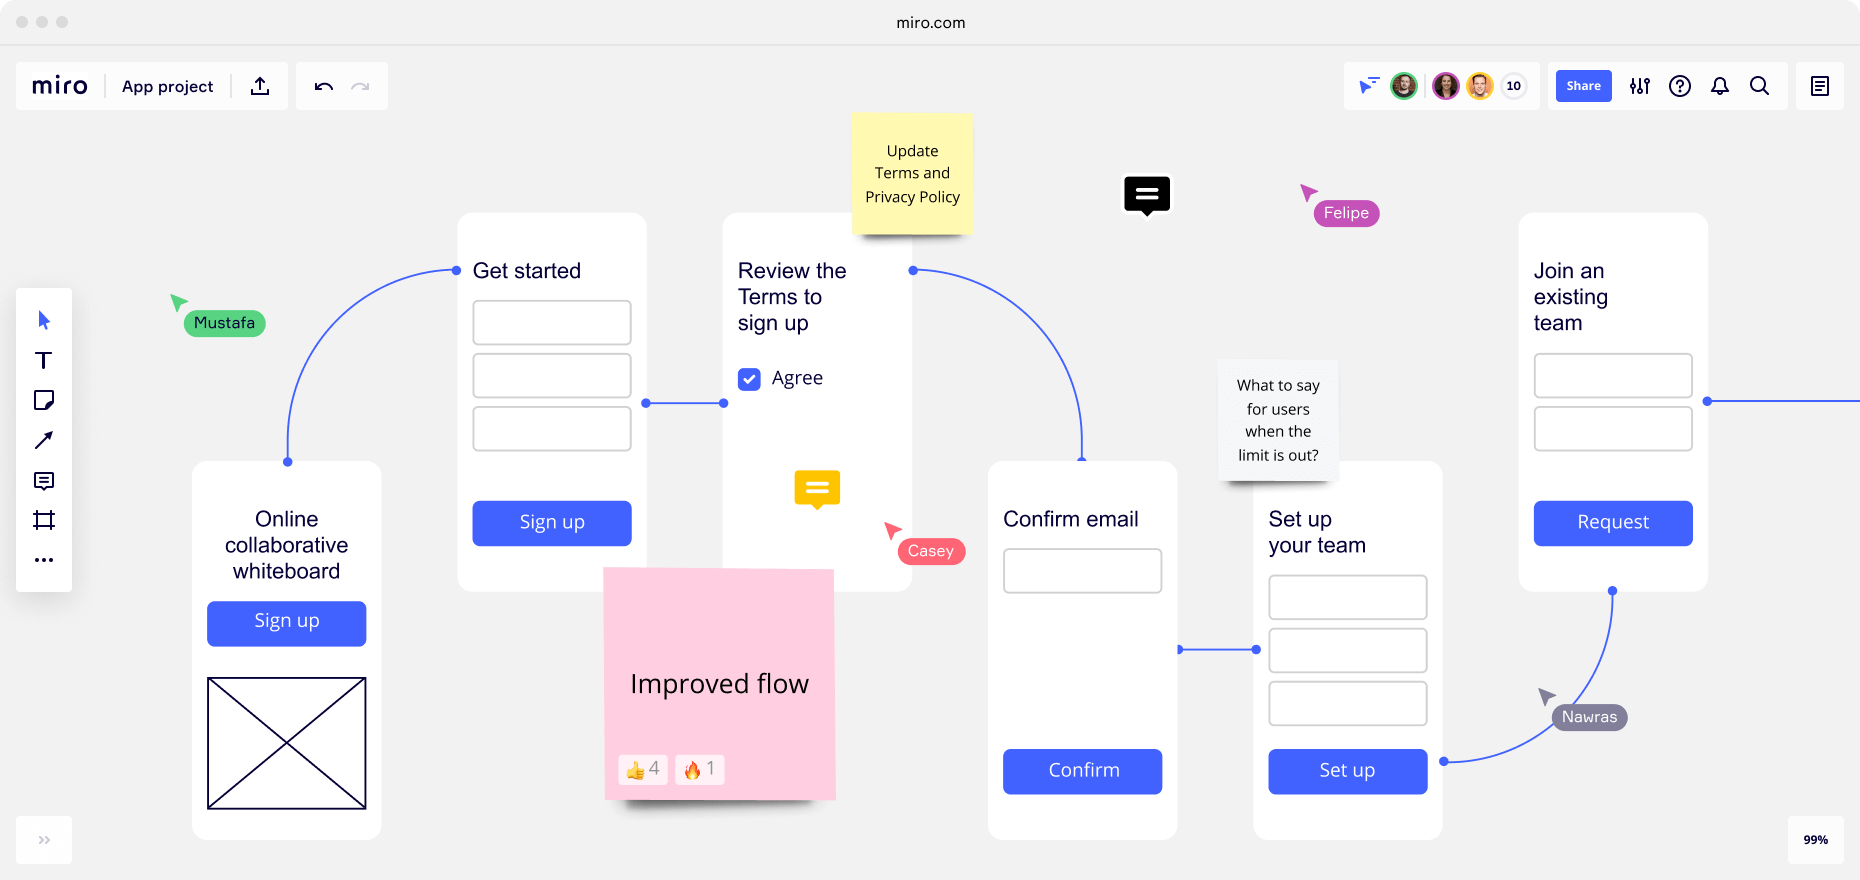 Free Online Canvas Tool for Design Sprints & Research | Miro